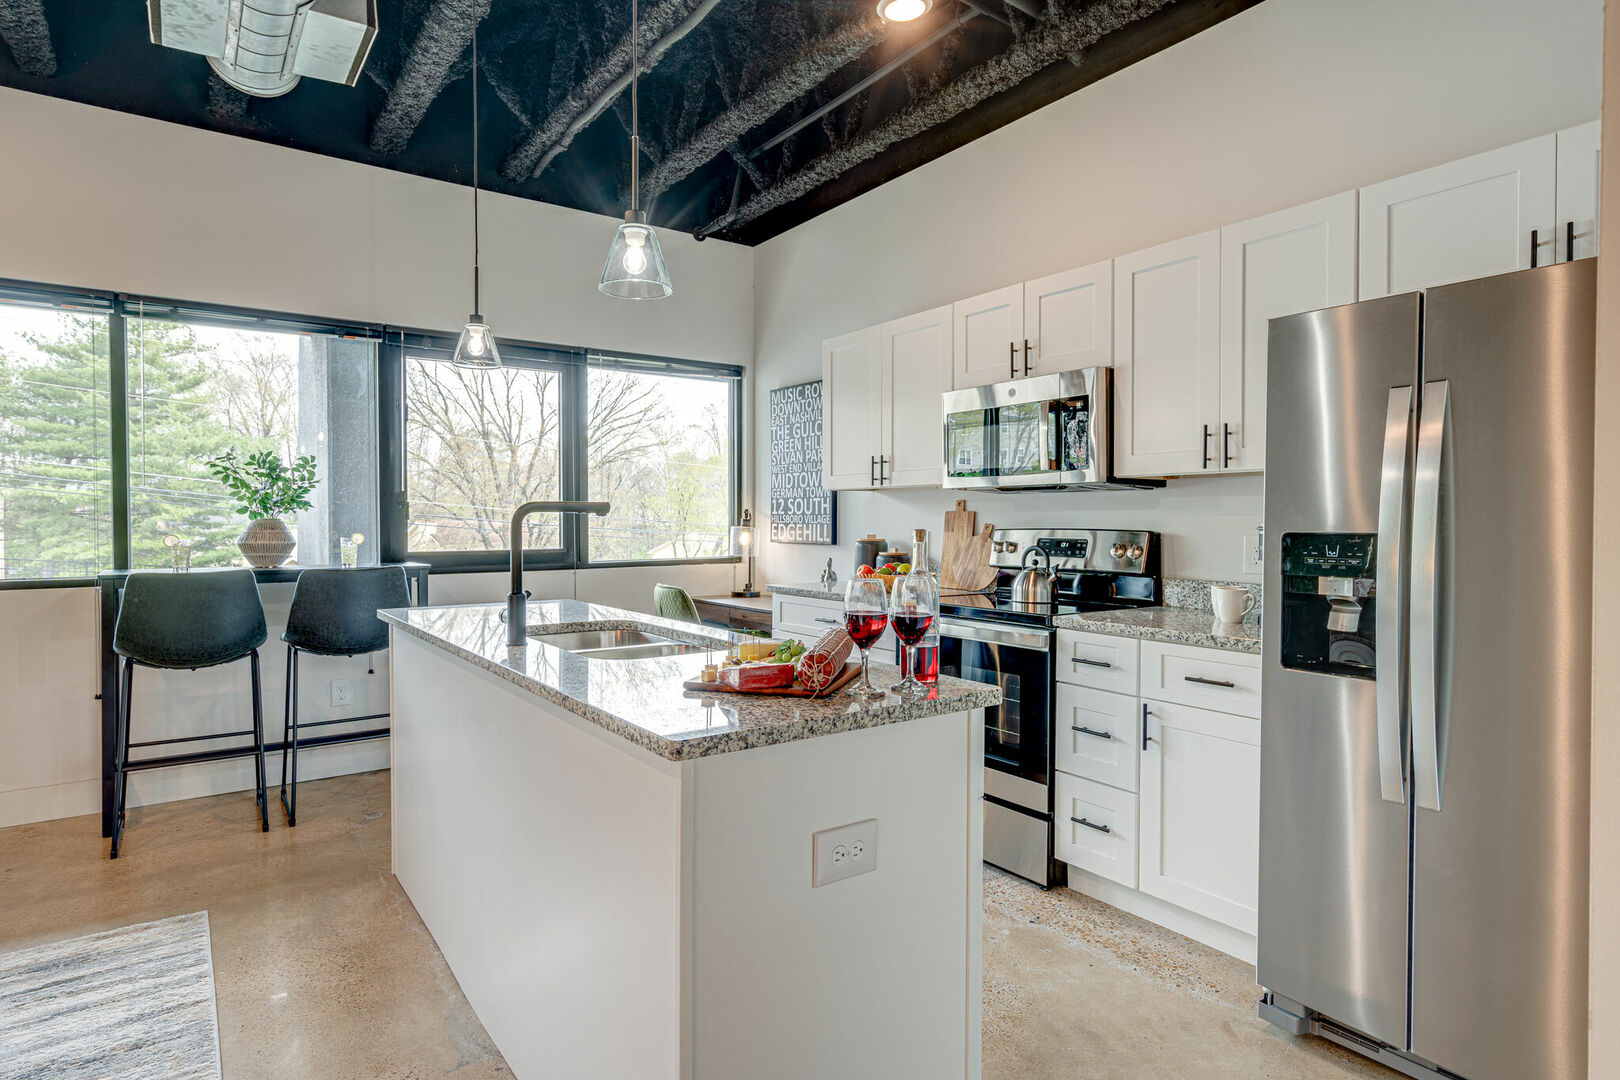 Fully equipped kitchen featuring stocked with basic cooking essentials and stainless steel appliances.